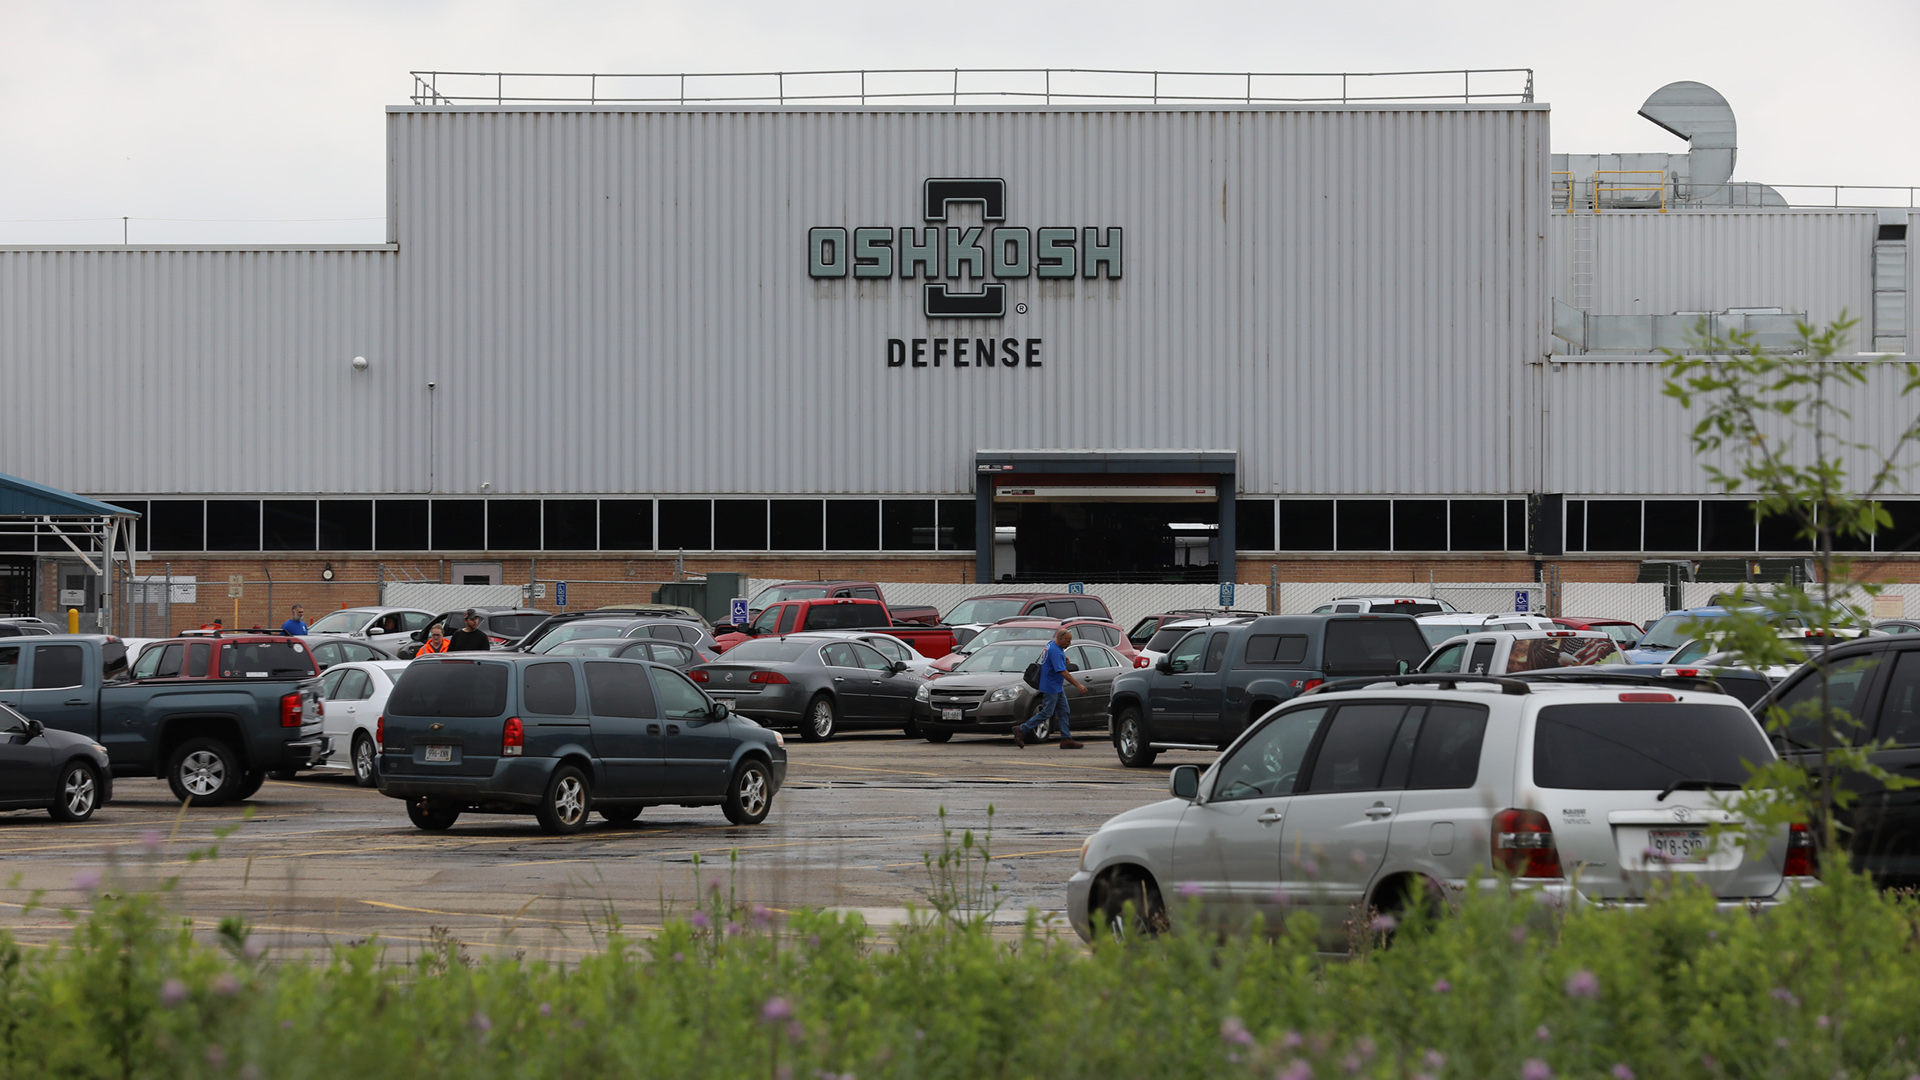 Workers walk in a car-filled parking lot in front of a multi-story brick and corrugated metal building fronted with a large Oshkosh Defense wordmark.